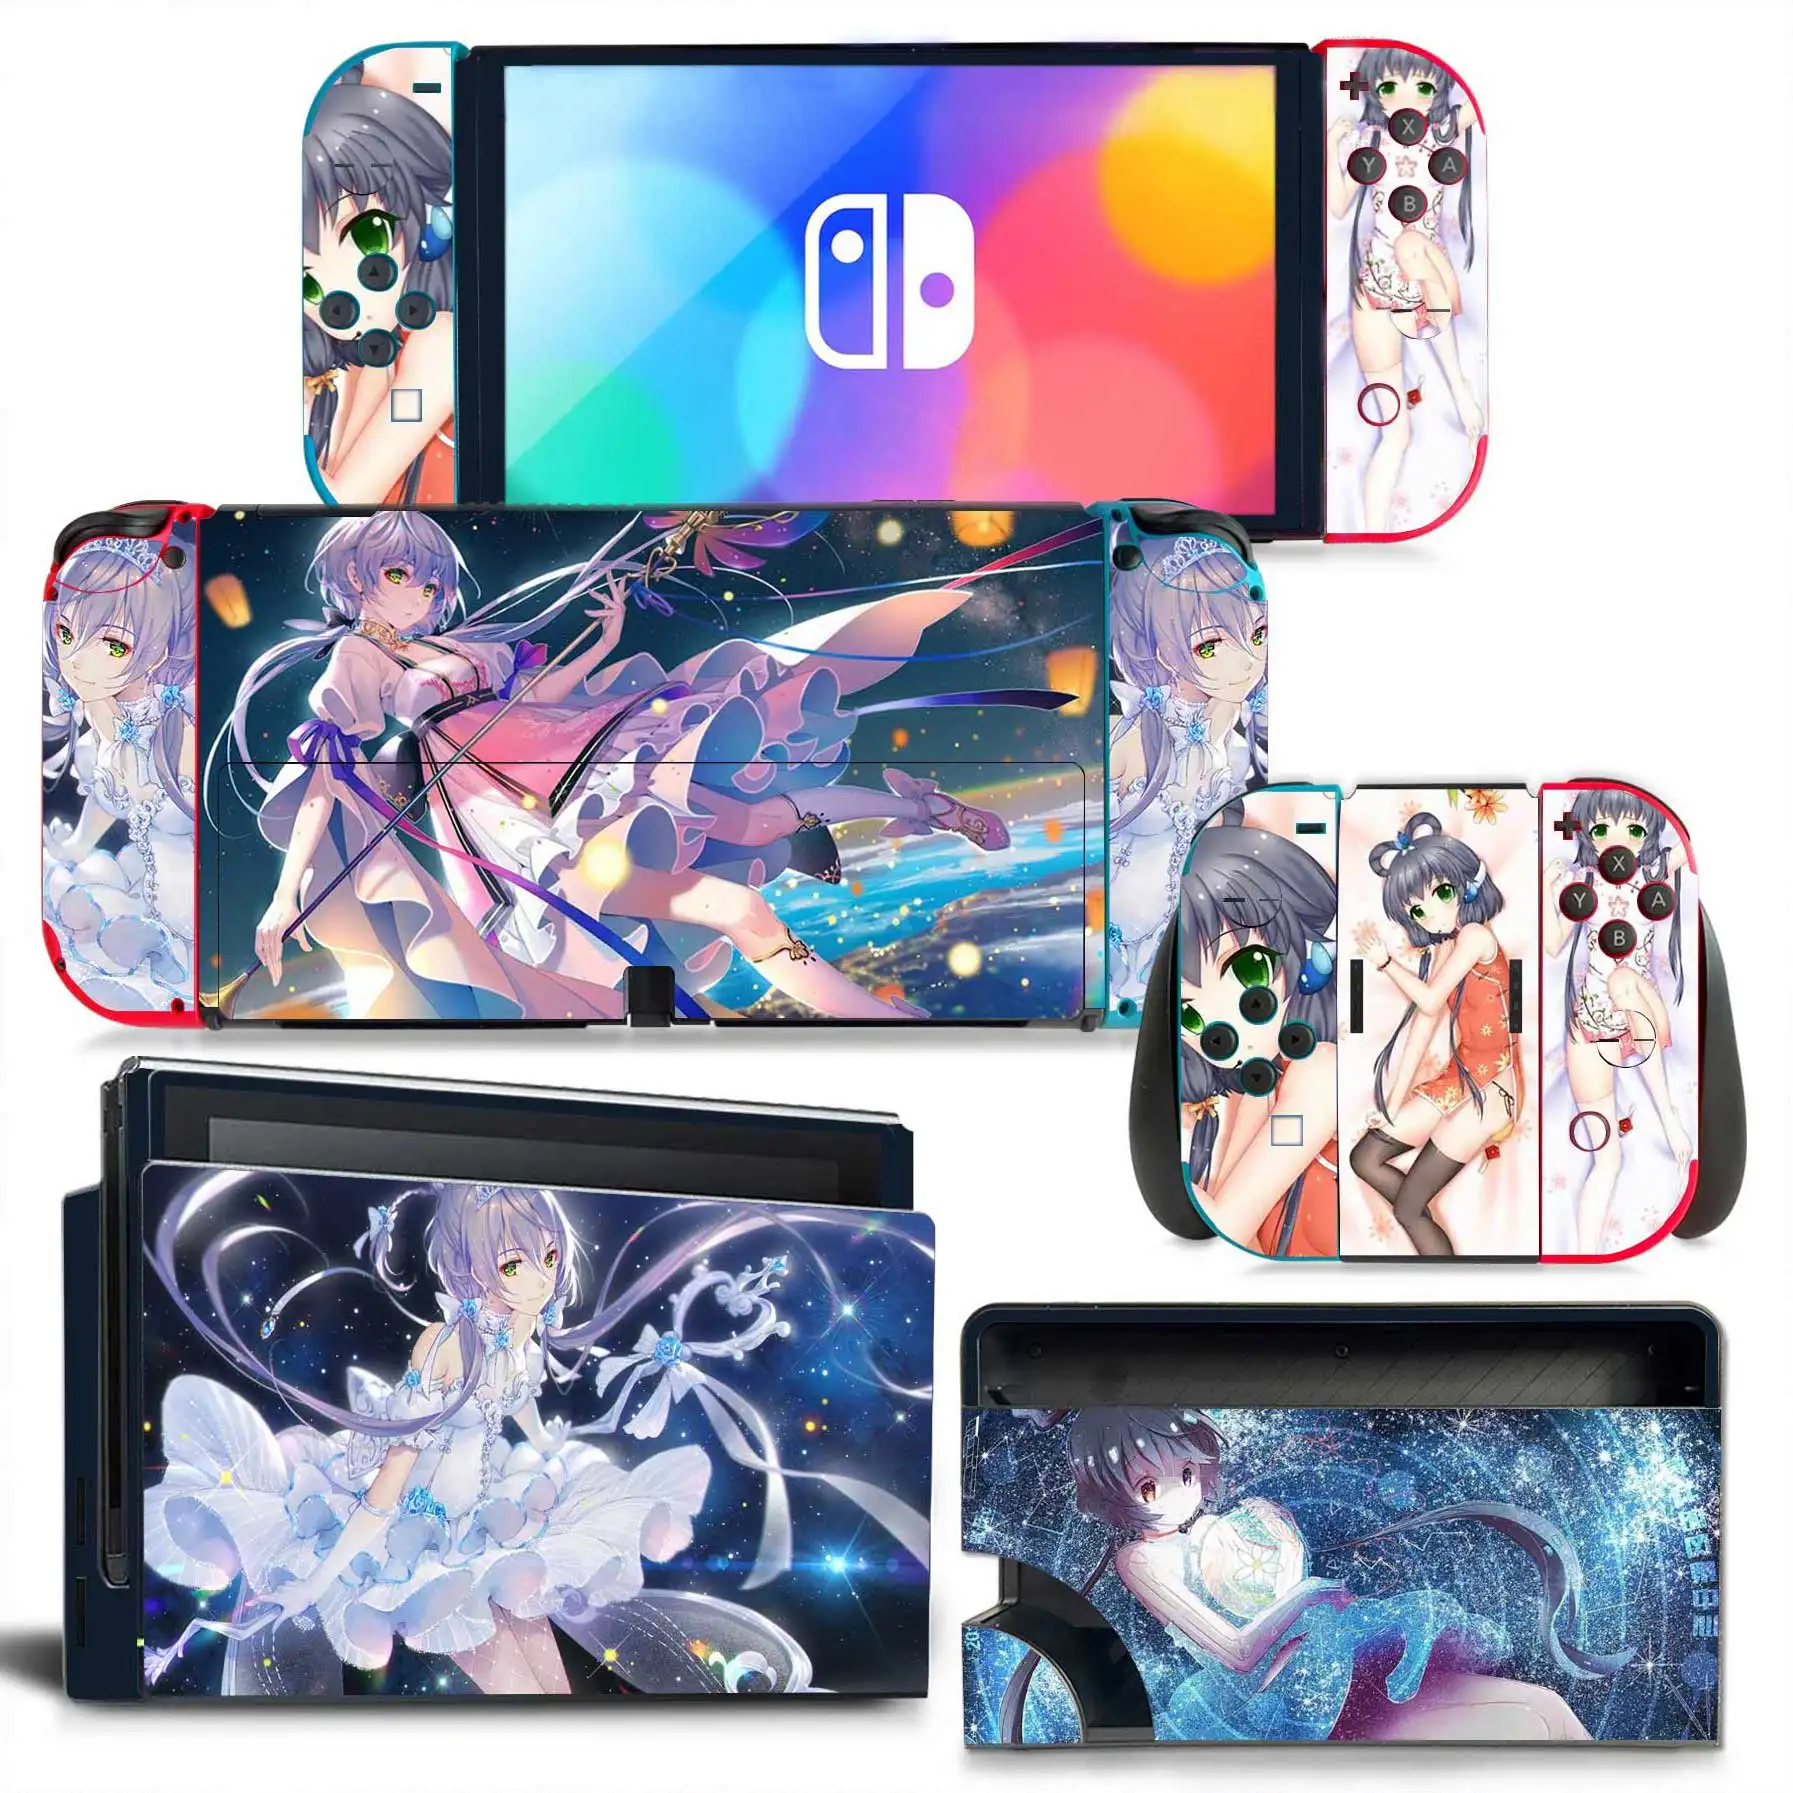 

Comic Style Vinyl Decal Skin Sticker For Nintendo Switch OLED Console Protector Game Accessoriy NintendoSwitch OLED